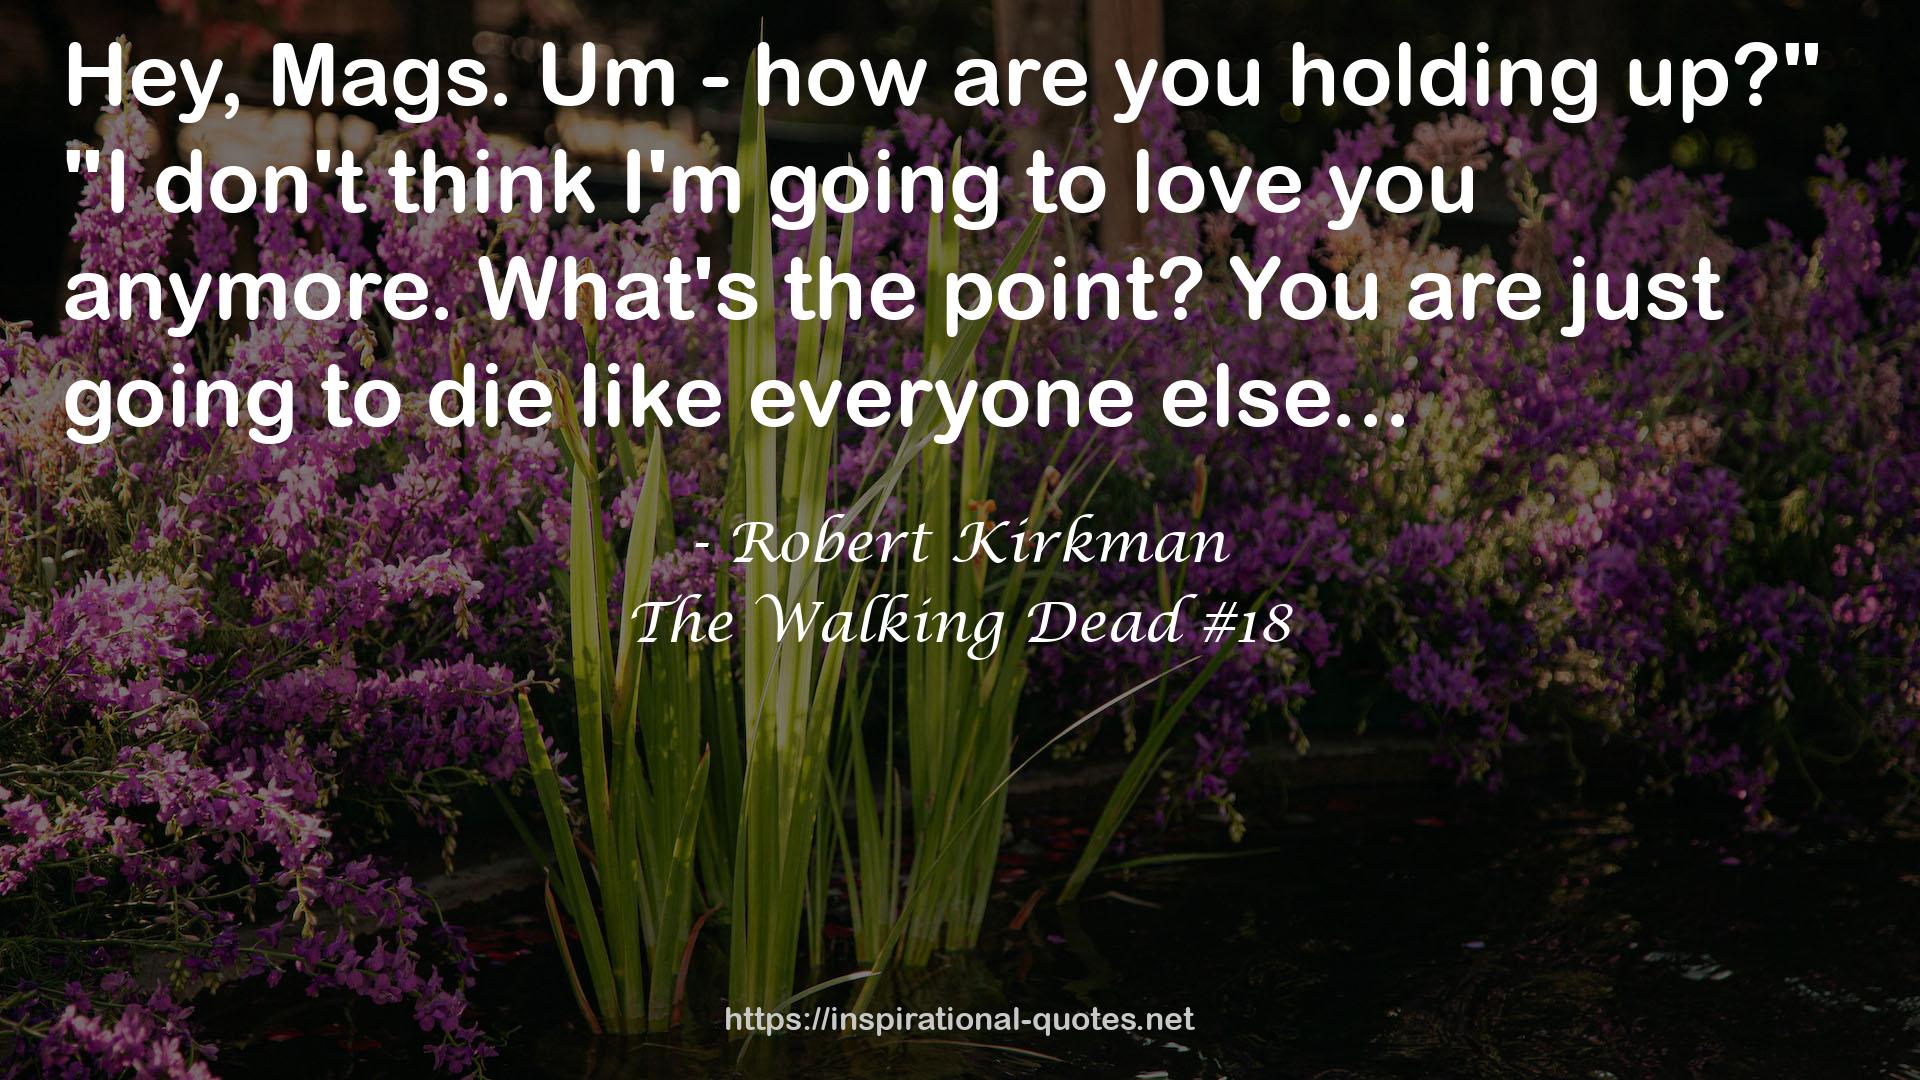 The Walking Dead #18 QUOTES